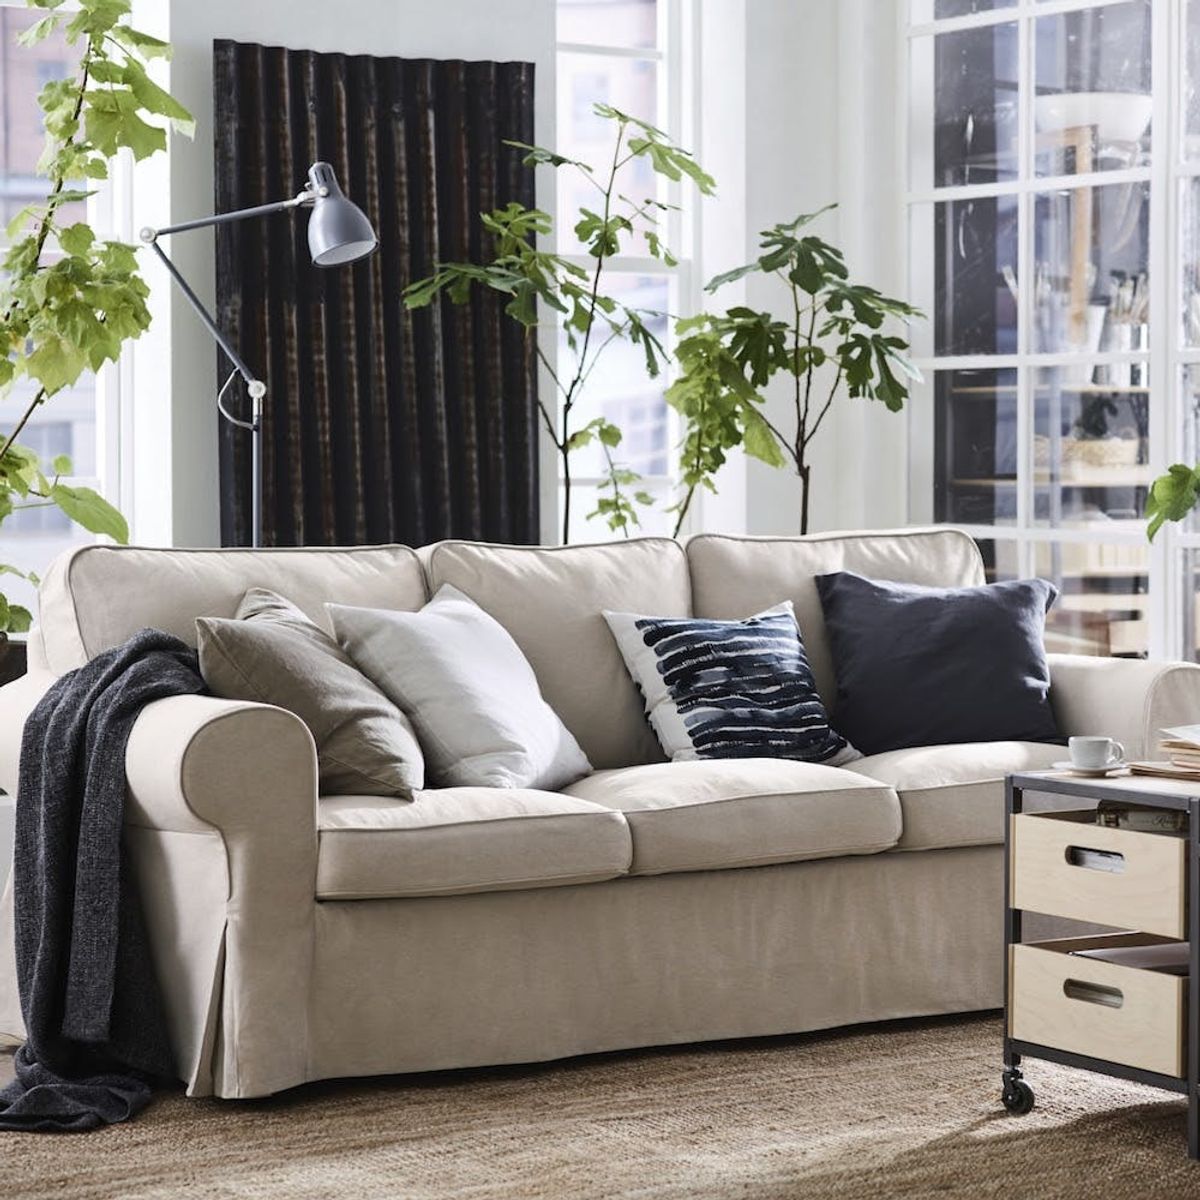 IKEA’s Classic Sofa Is Getting a Huge Price Cut (Today Only!)